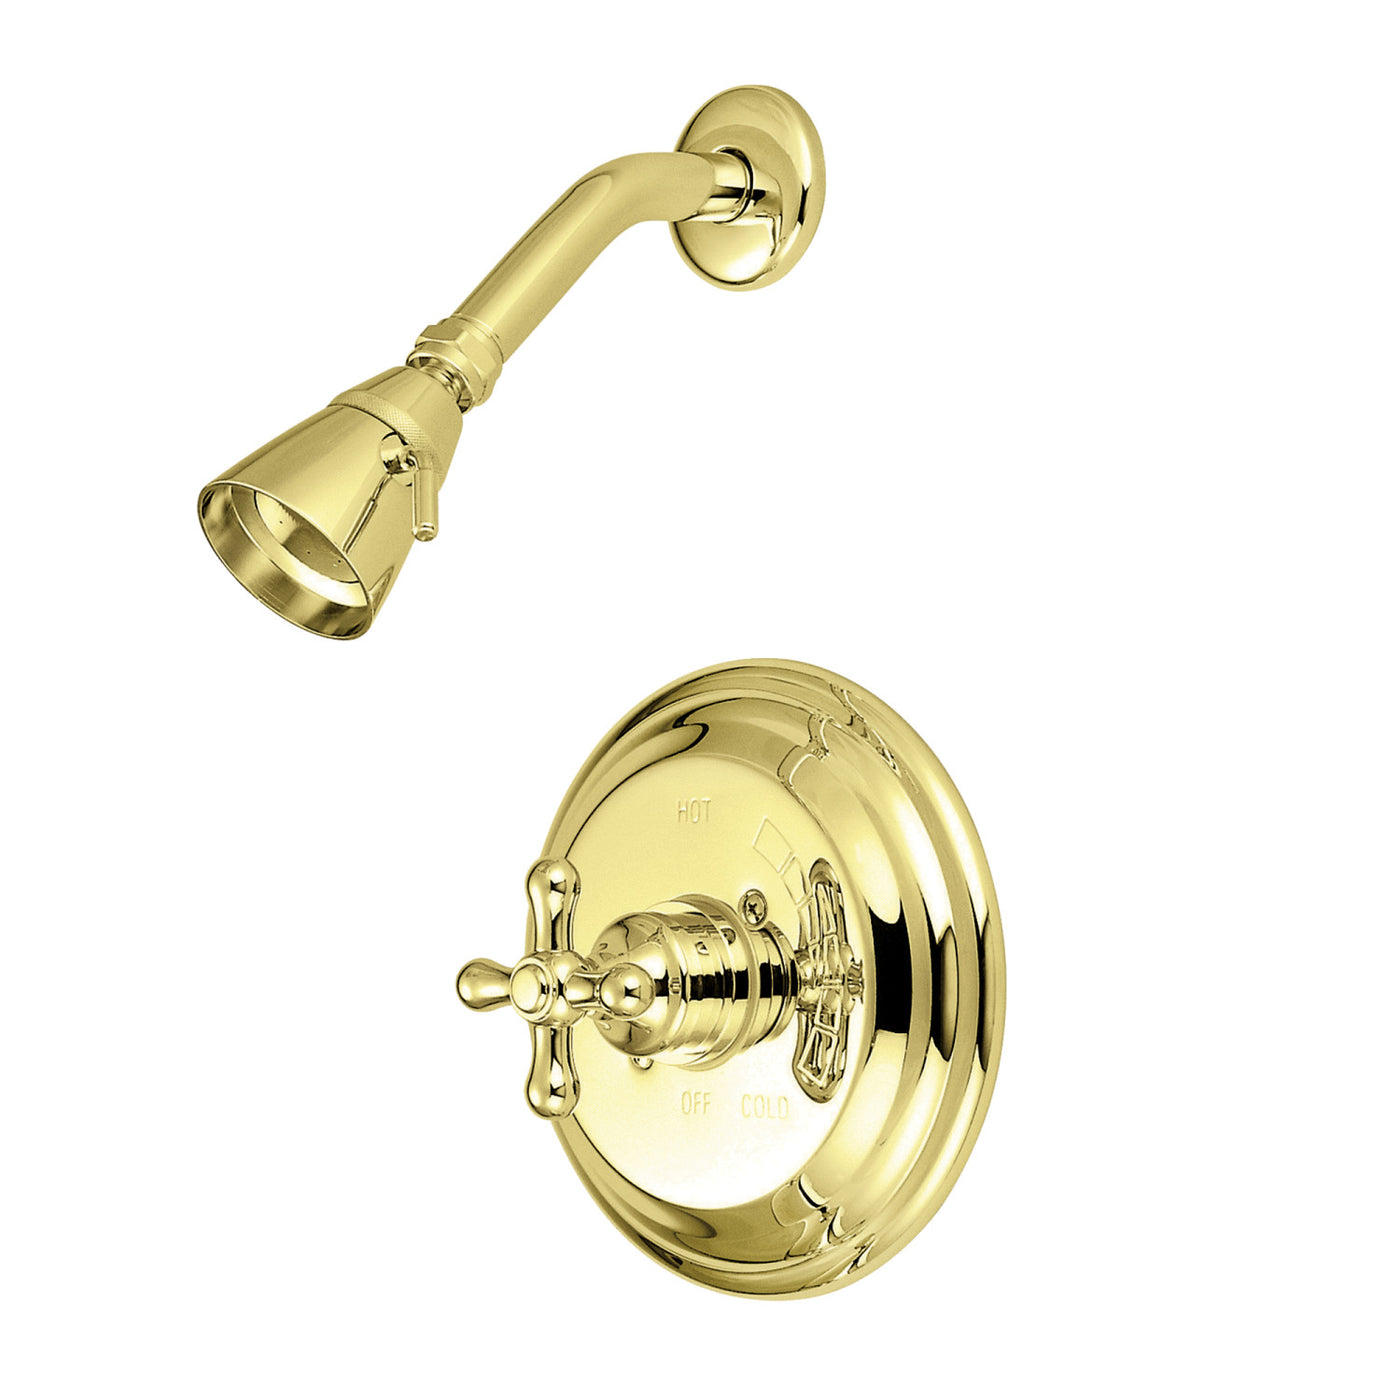 Elements of Design EB3632AXSO Pressure Balanced Shower Faucet, Polished Brass